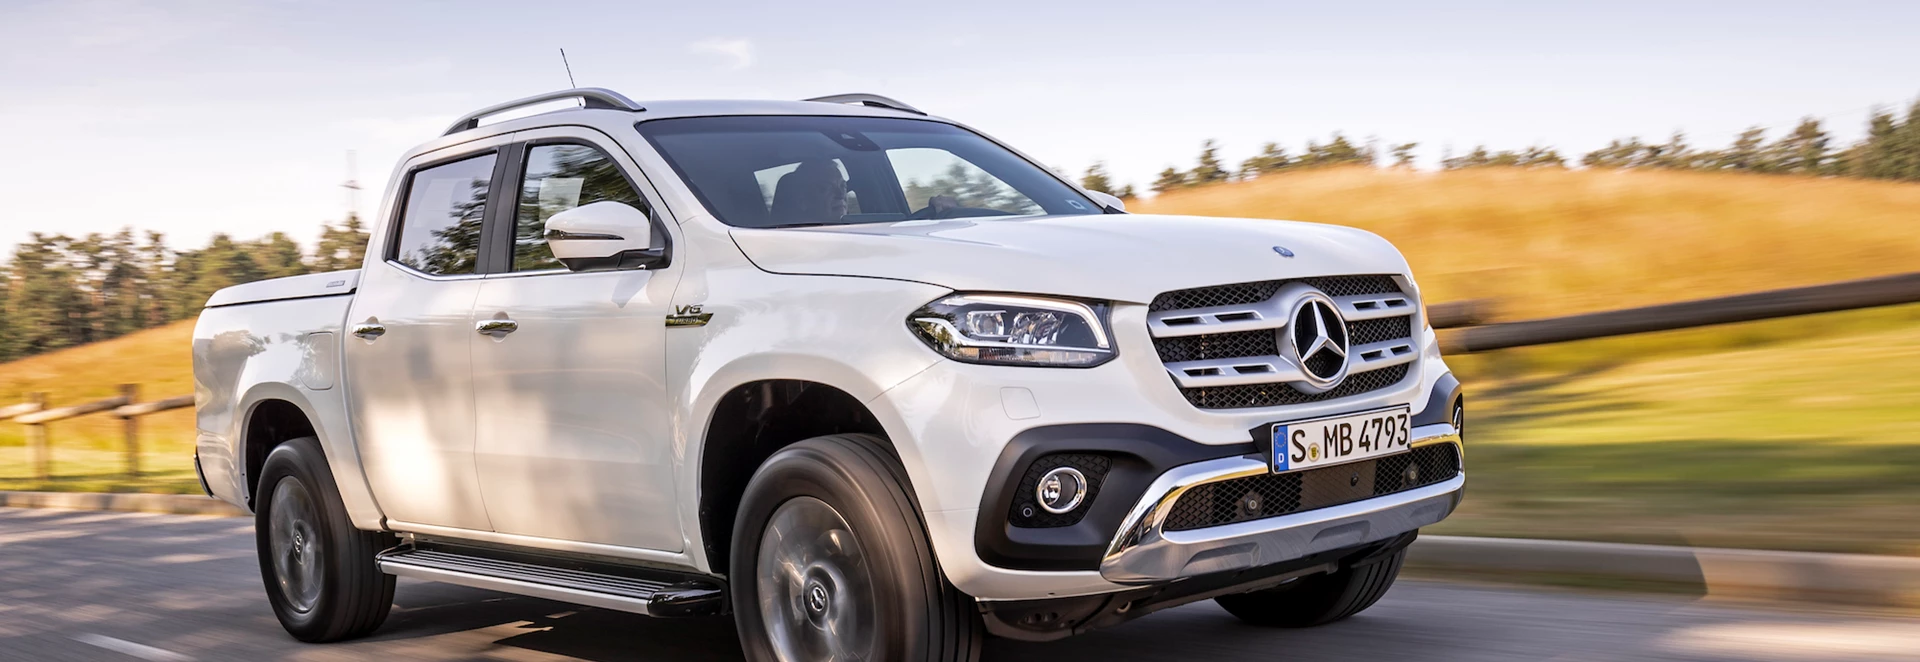 Mercedes announces pricing for X-Class V6